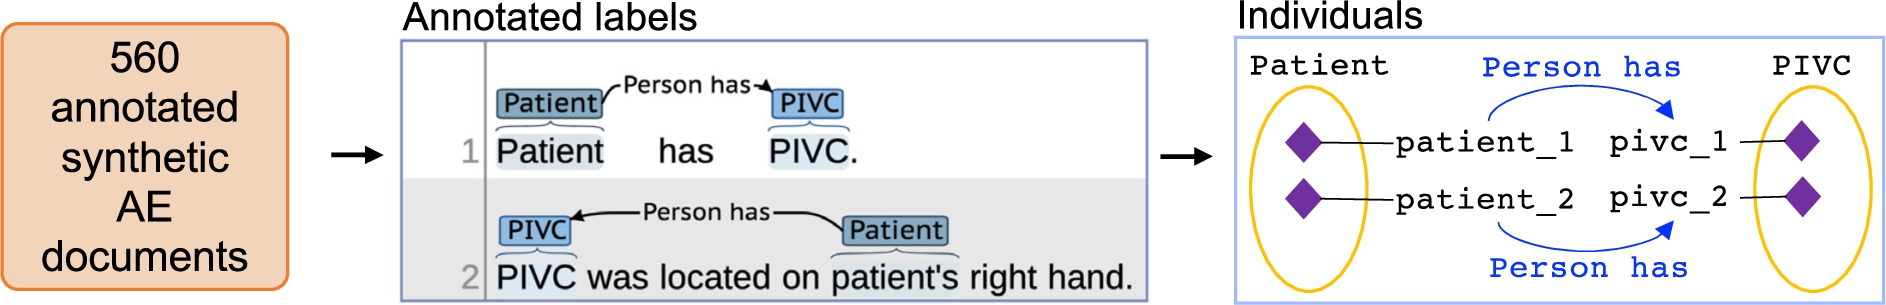 Using an annotated corpus to populate individuals in a terminology. Each of the 560 documents were translated into an individual, and each label within a document was also translated into an individual. In the simplified example, an annotated document has 2 patient labels, 2 PIVC labels, and 2 →Person has relationships linking the labels. Each label is converted into an individual (i.e., a purple diamond) of the corresponding class (i.e., Patient or PIVC yellow circle). Then the labels are linked using the →Person has object property, similarly to how the →Person has relationship links labels in the annotated text.